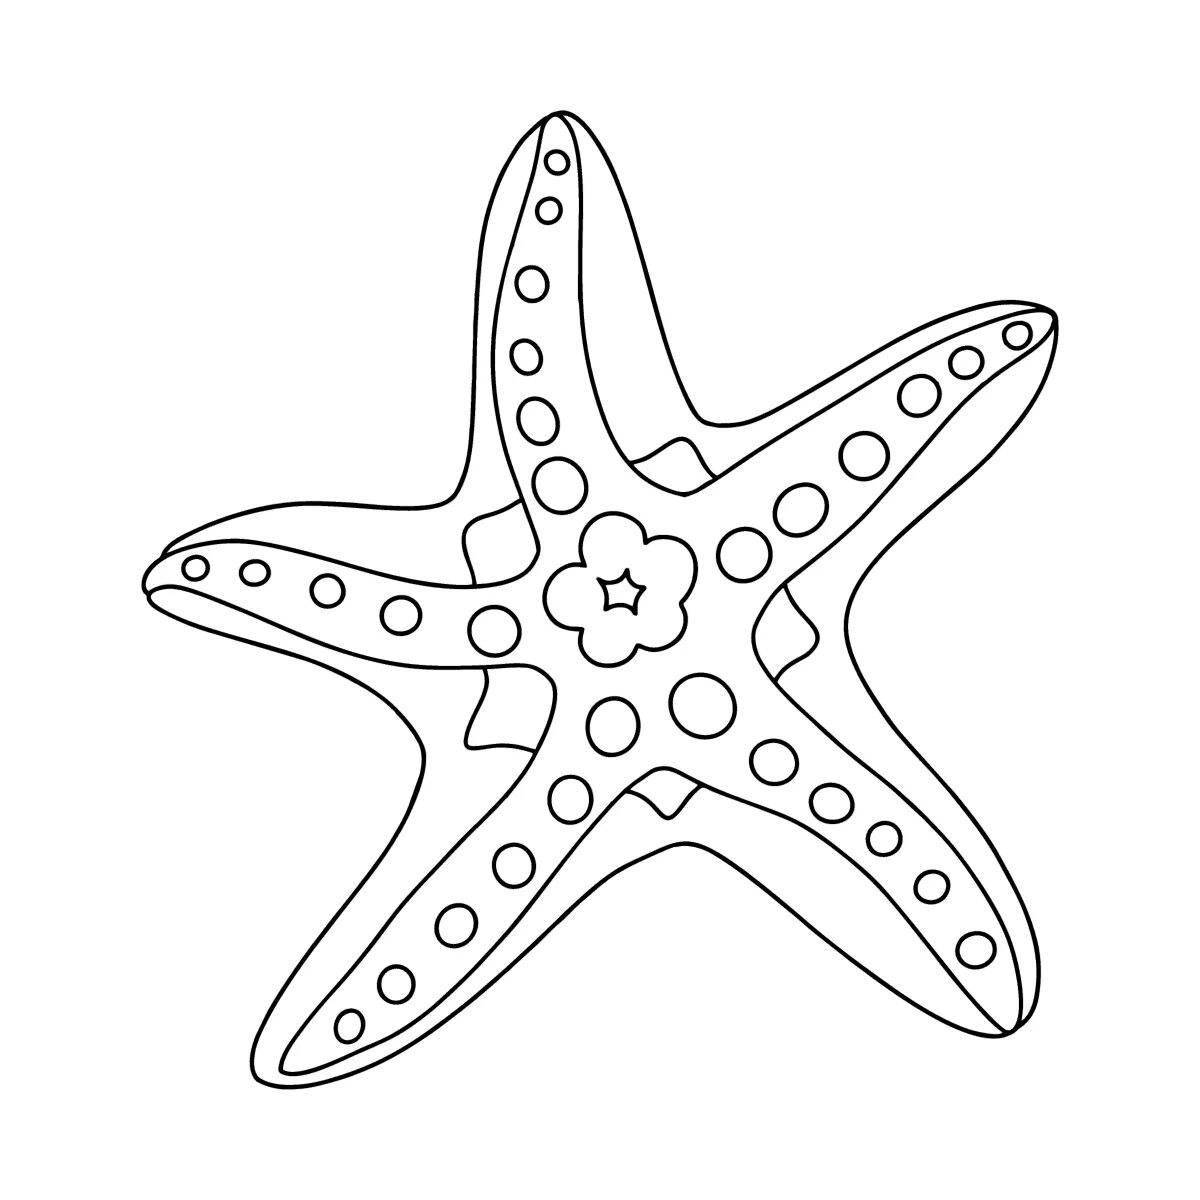 Amazing starfish coloring book for kids